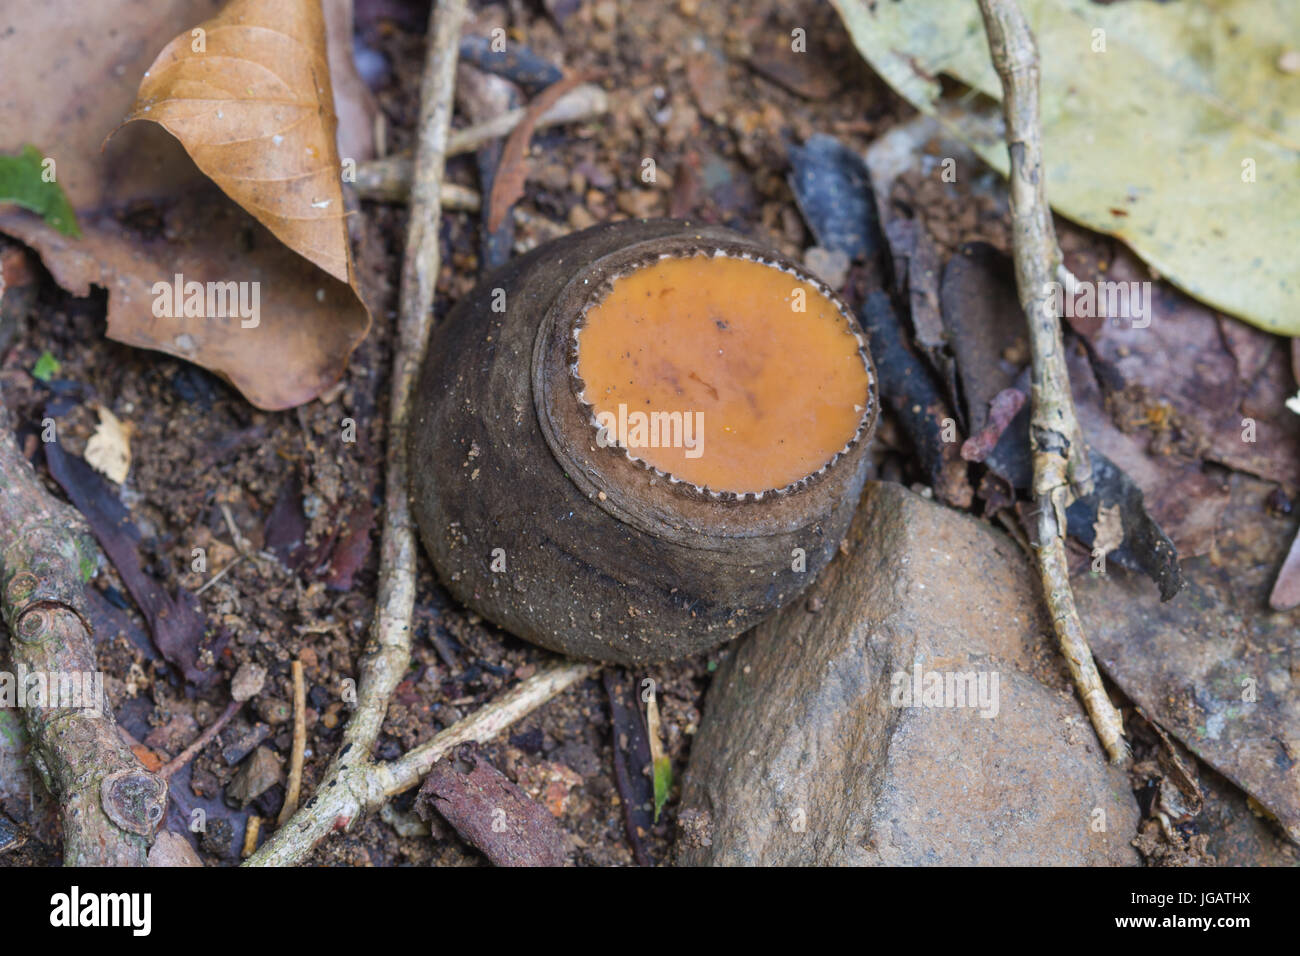 Amazing mushroom in deep forest Thailand, mushrooms growing on ground in the forest Stock Photo